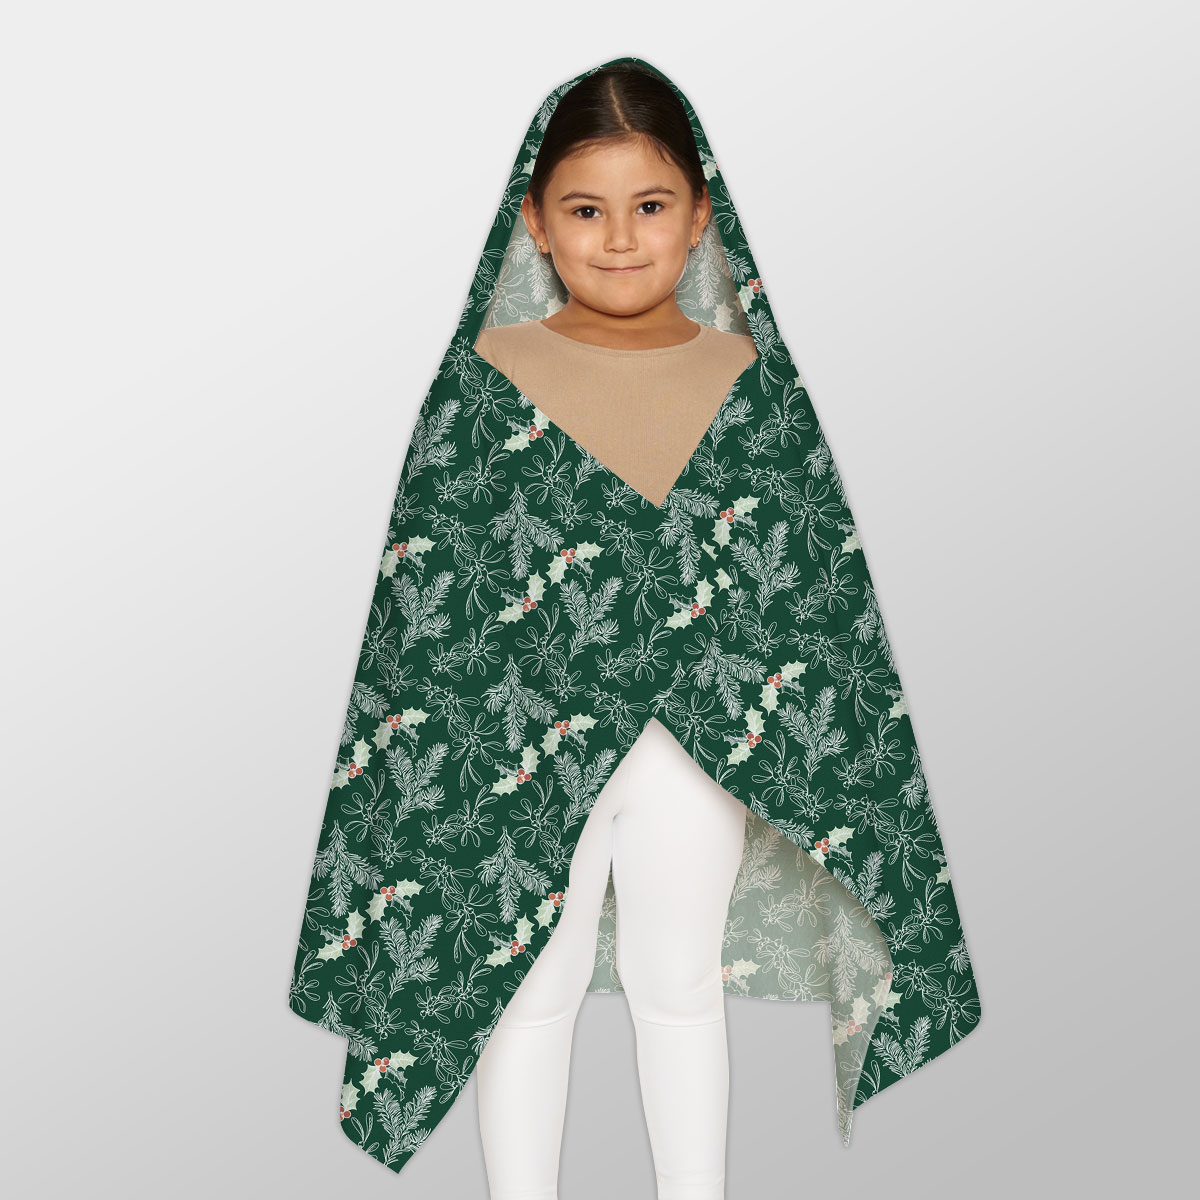 Holly Leaf, Christmas Mistletoe And Pine Tree Branche Youth Hooded Towel